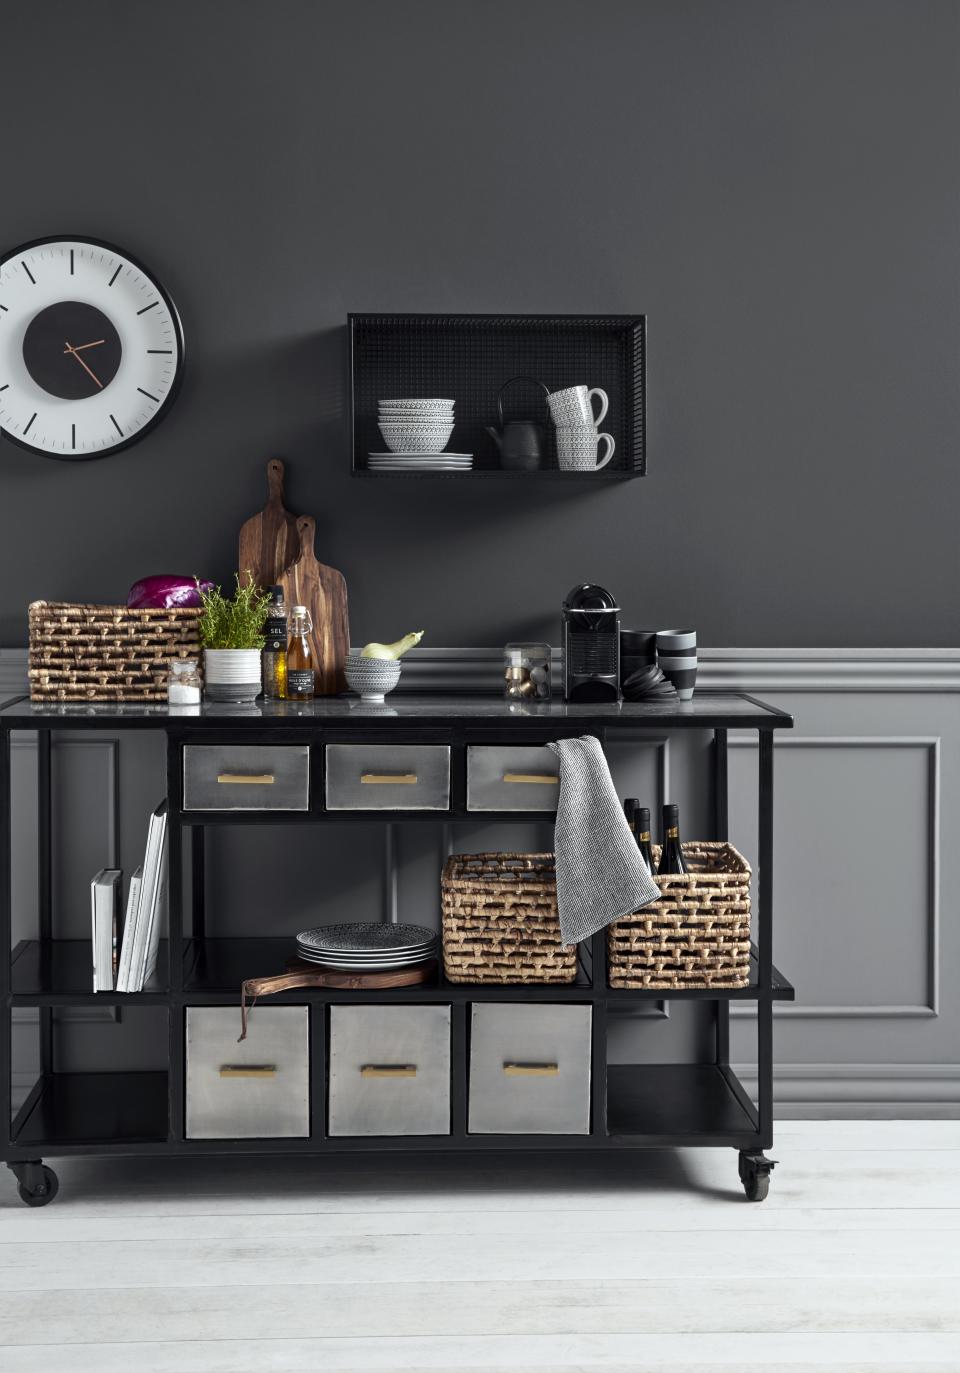 <p> Something of a chameleon in the kitchen, kitchen trolleys are as suited to life as a butcher&apos;s block as they are as a spot for vegetable (or wine) storage.&#xA0; </p> <p> This Black Metal Kitchen Trolley from Not On The High Street is a great example of a piece that packs a punch in terms of functionality &#x2013; hello, sturdy tabletop and storage space &#x2013; while working as a beautiful piece of furniture in its own right. </p>